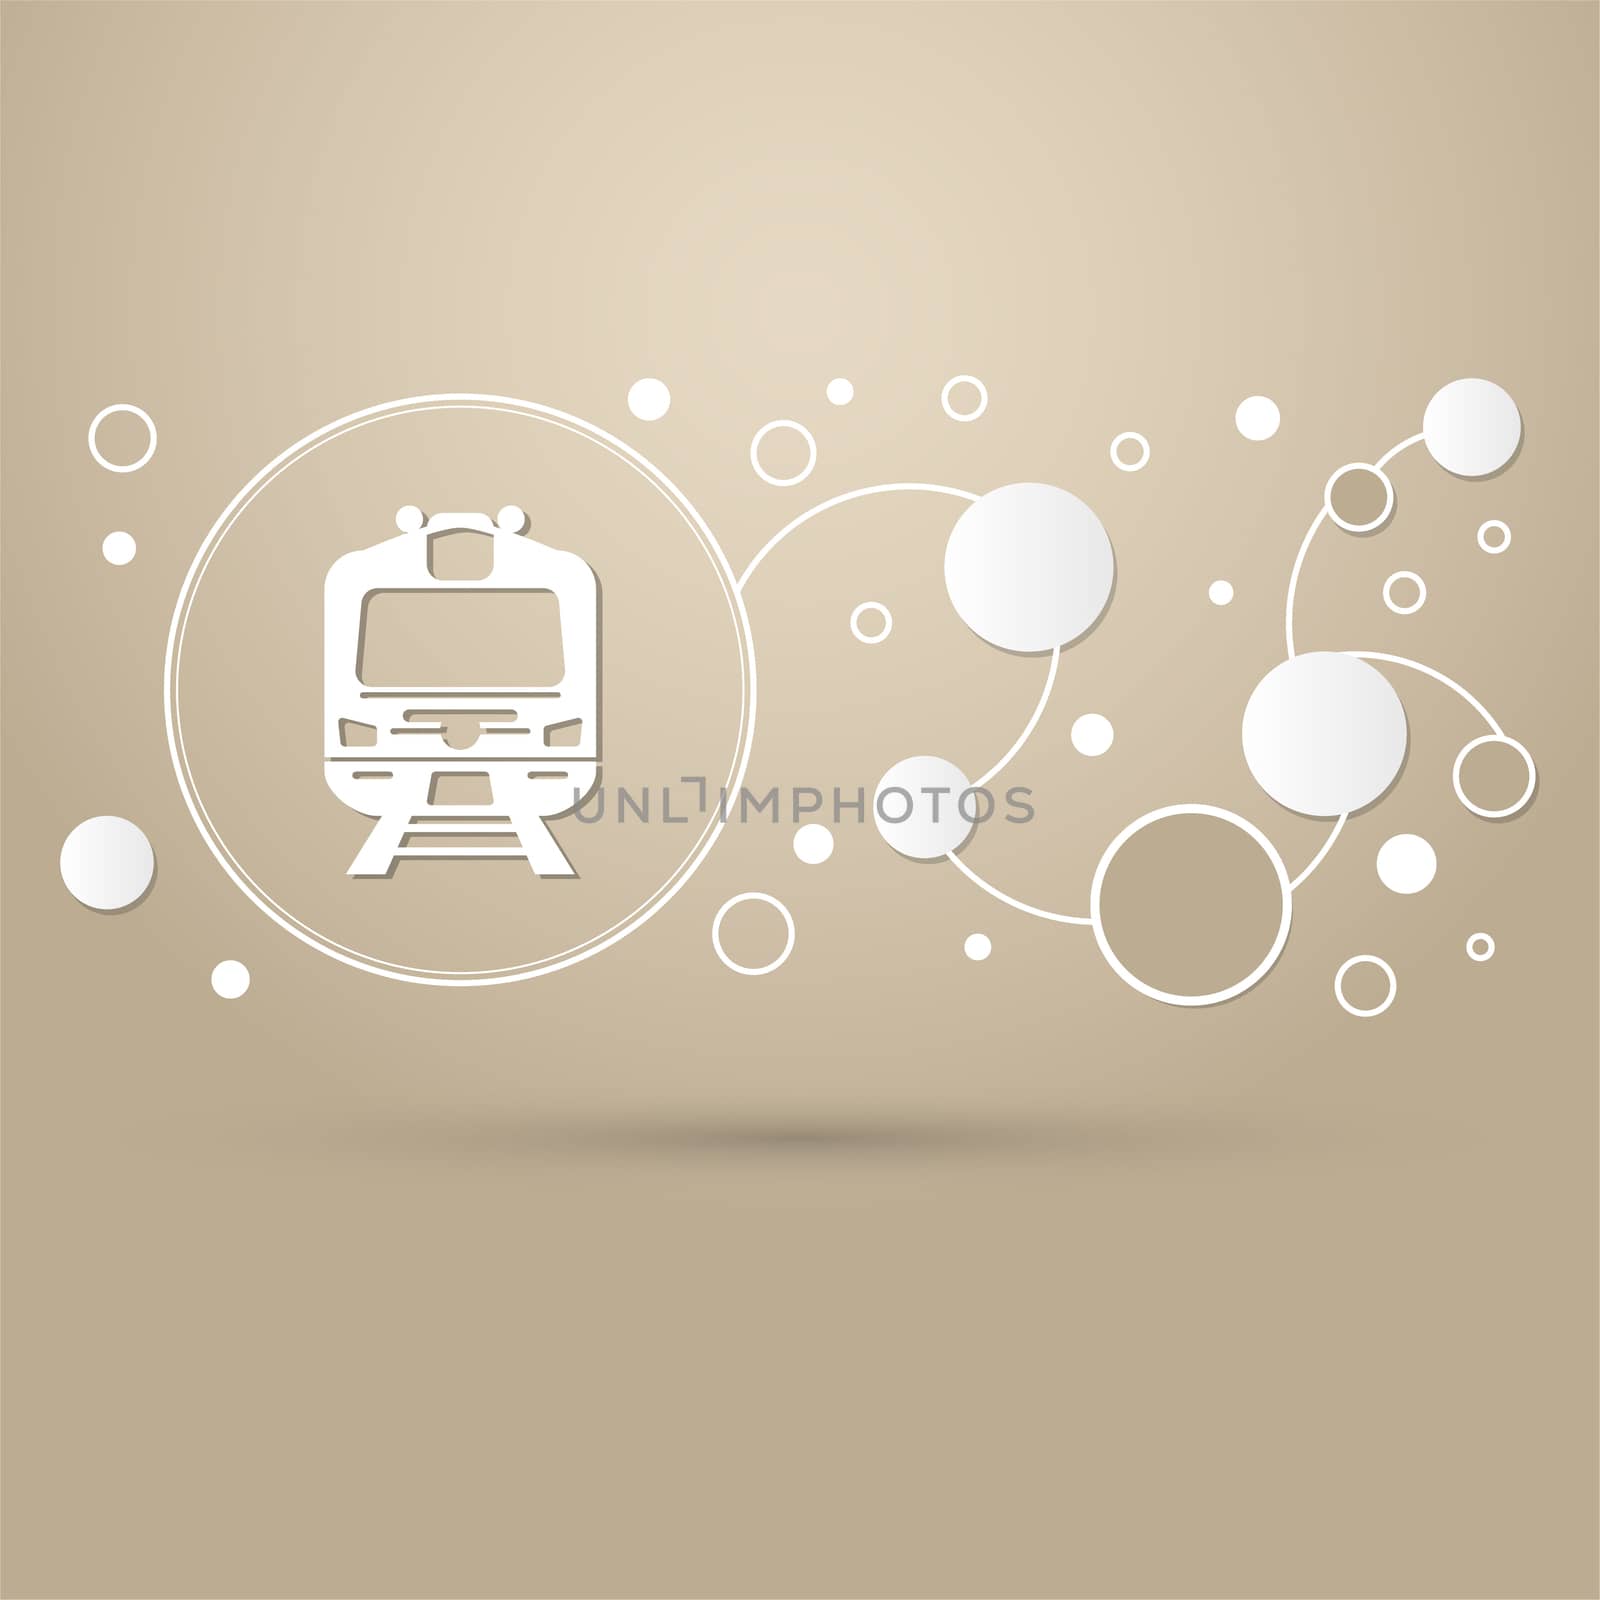 Train icon on a brown background with elegant style and modern design infographic. illustration